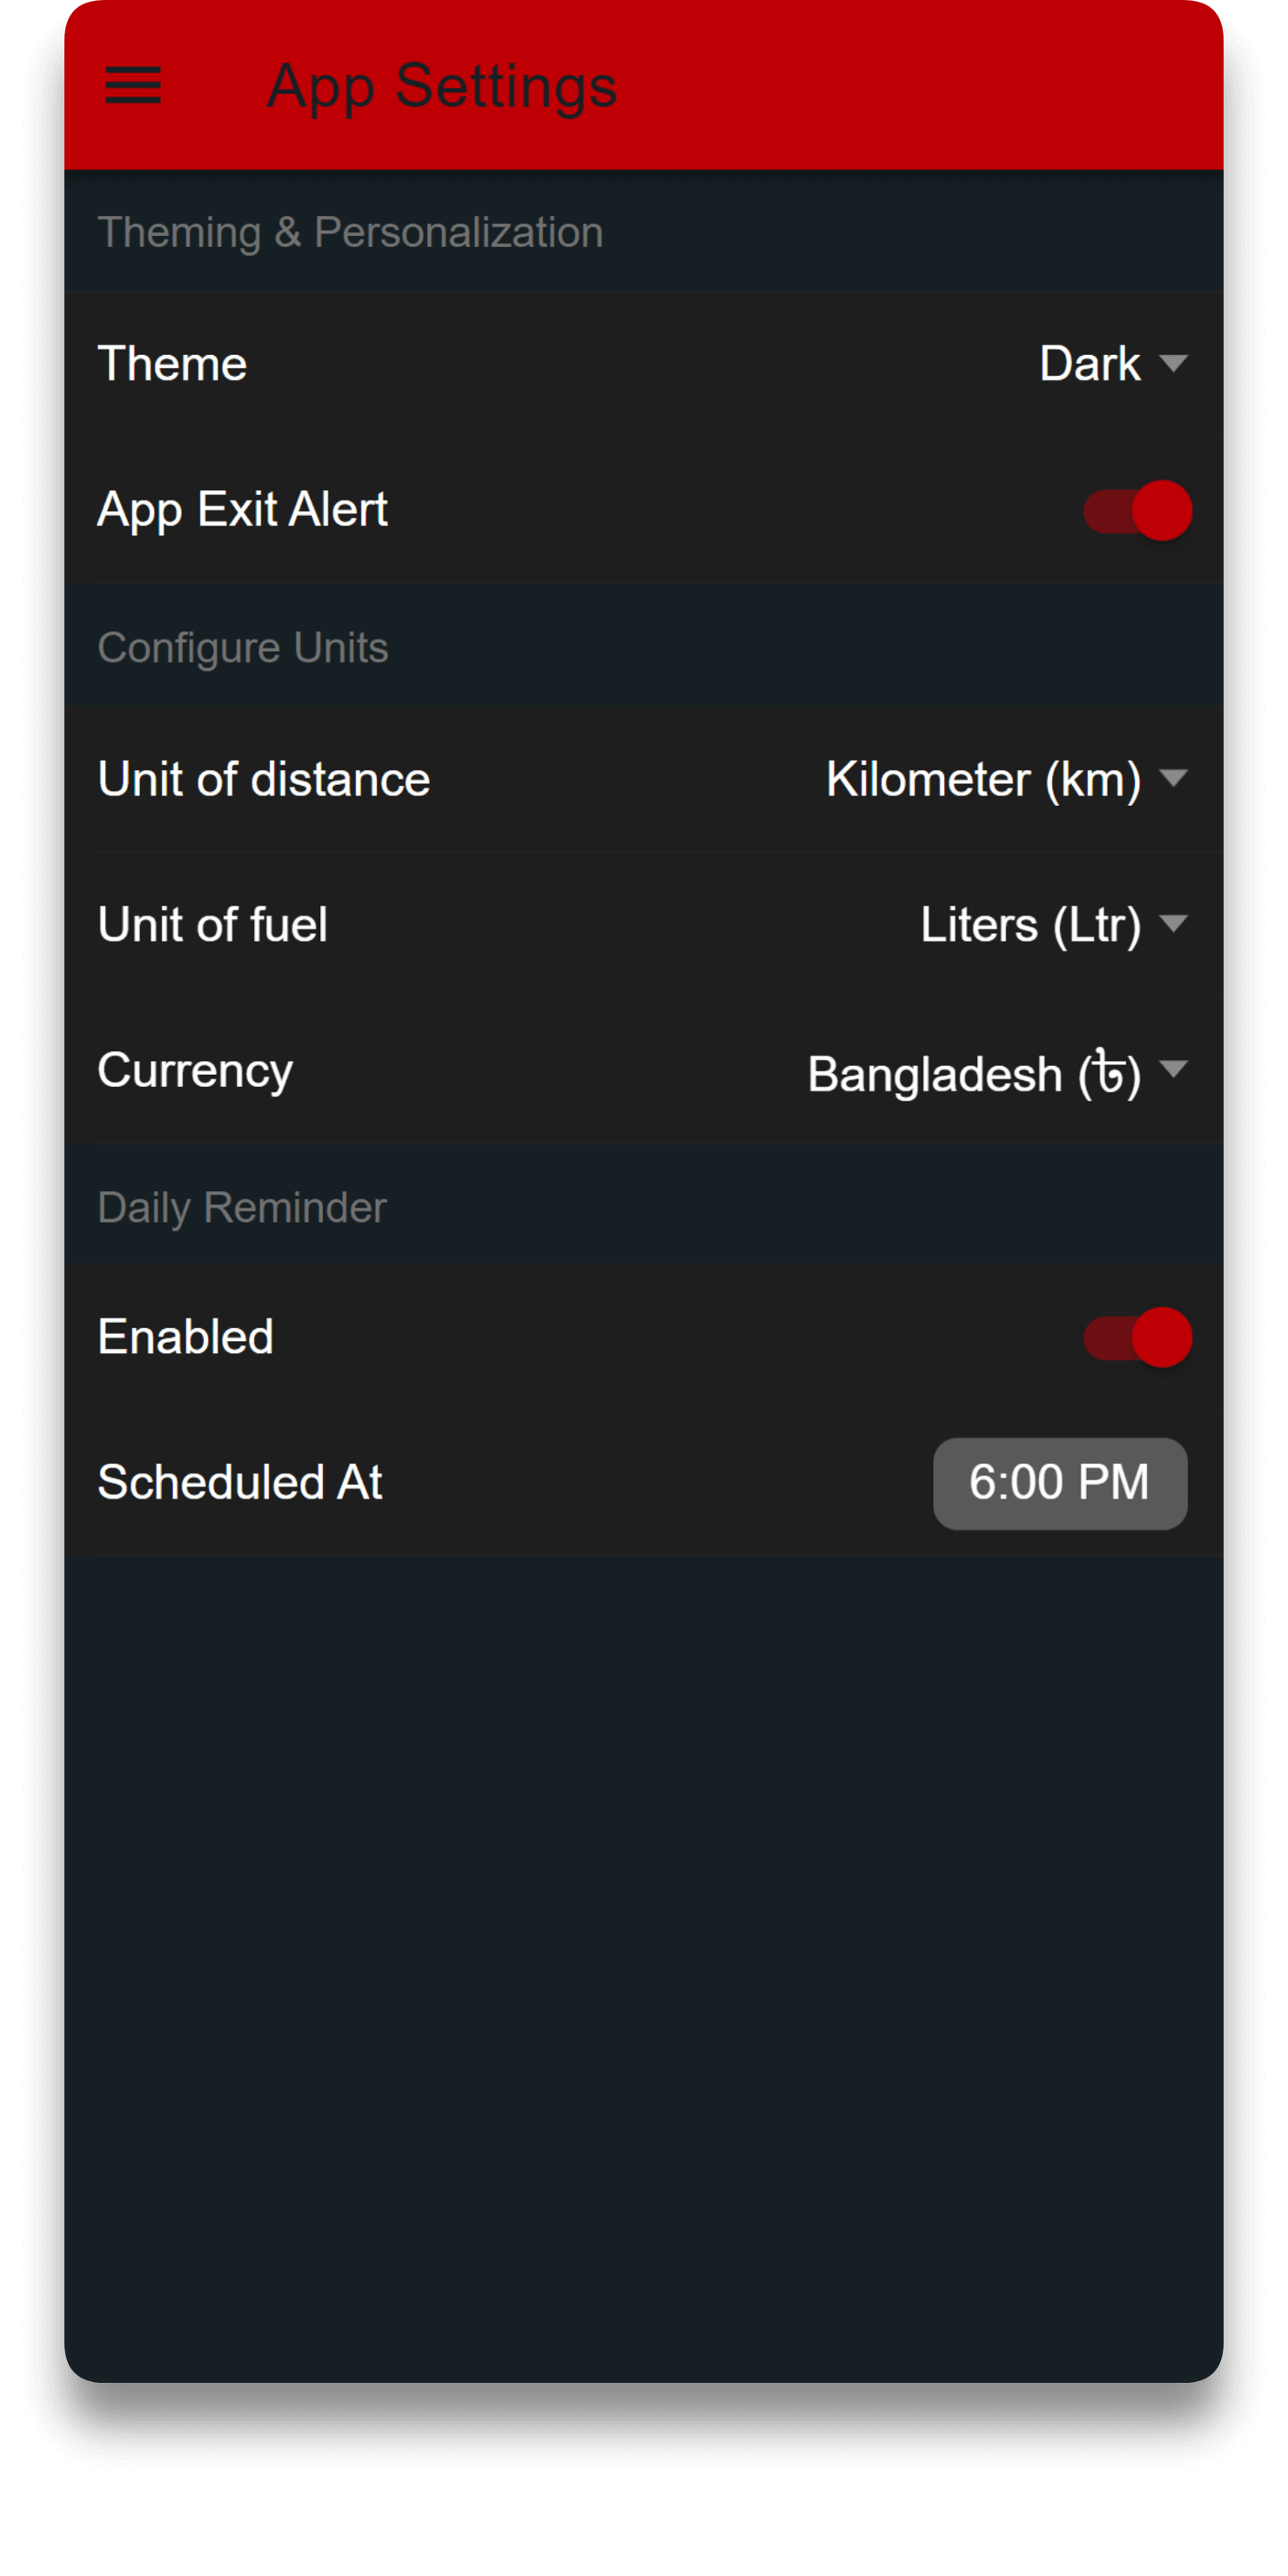 MyBikes.App: Motorcycle Manager app settings feature